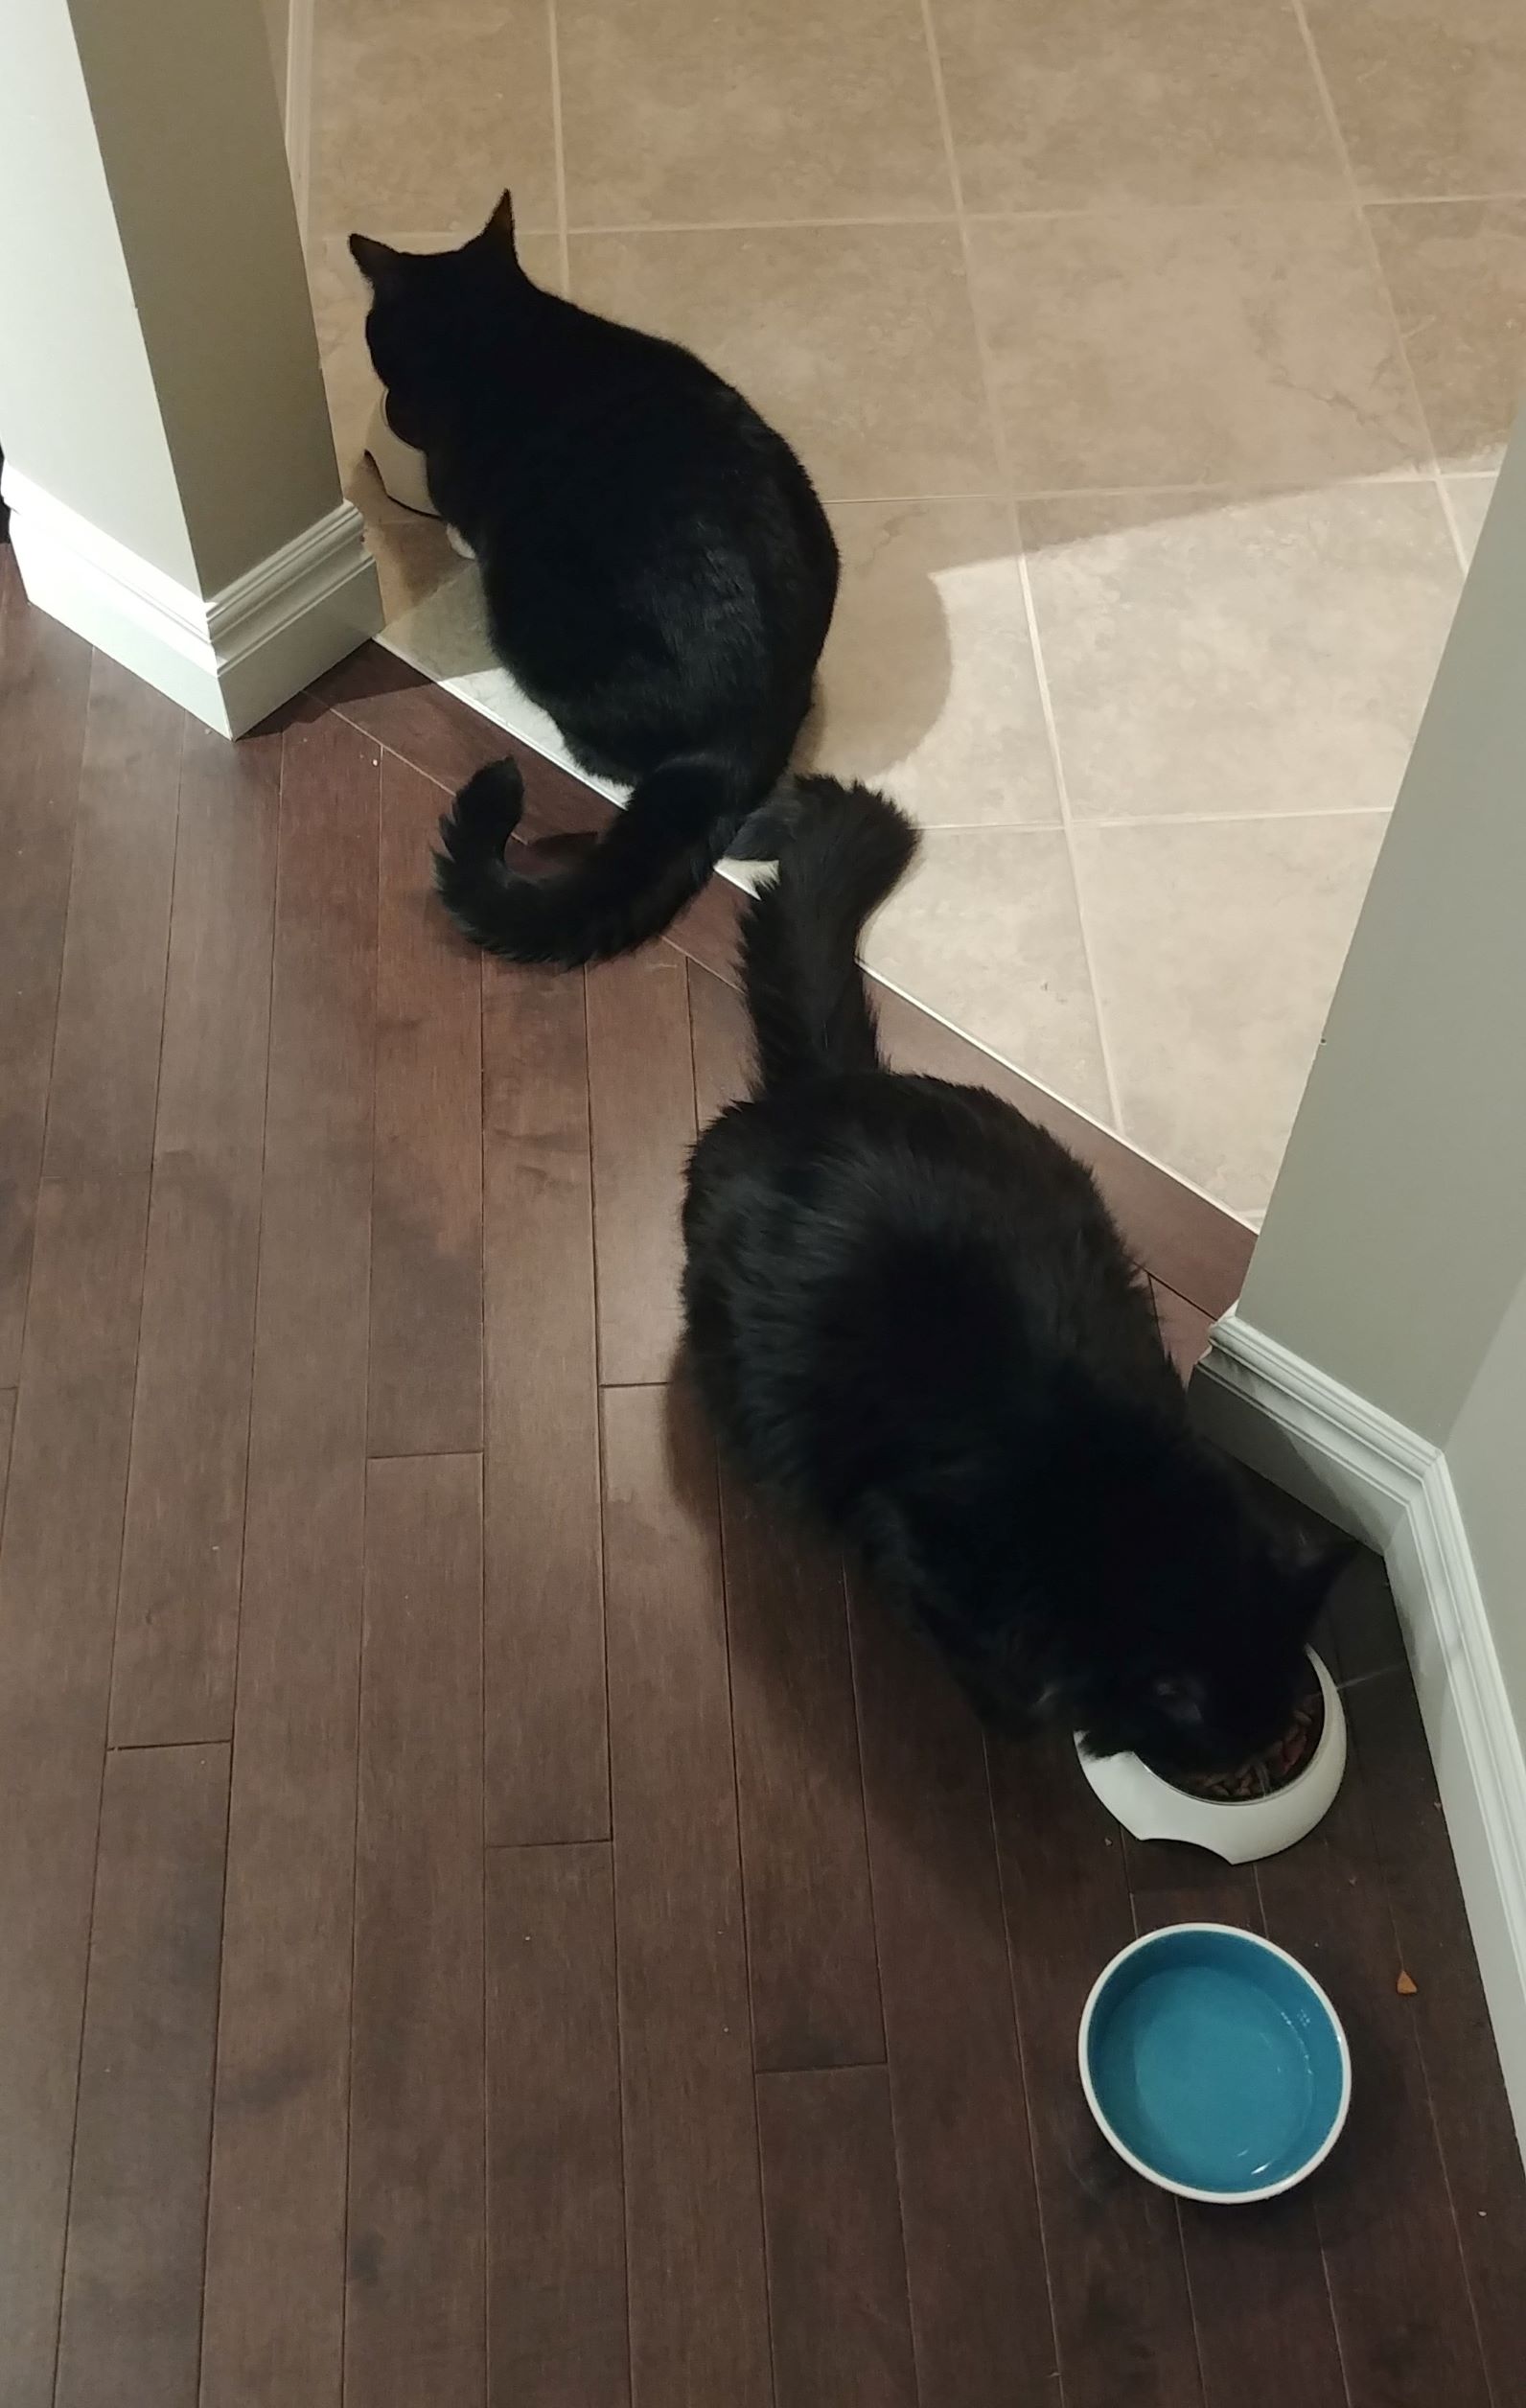 Reggie and his brother Billy eating from their dishes.